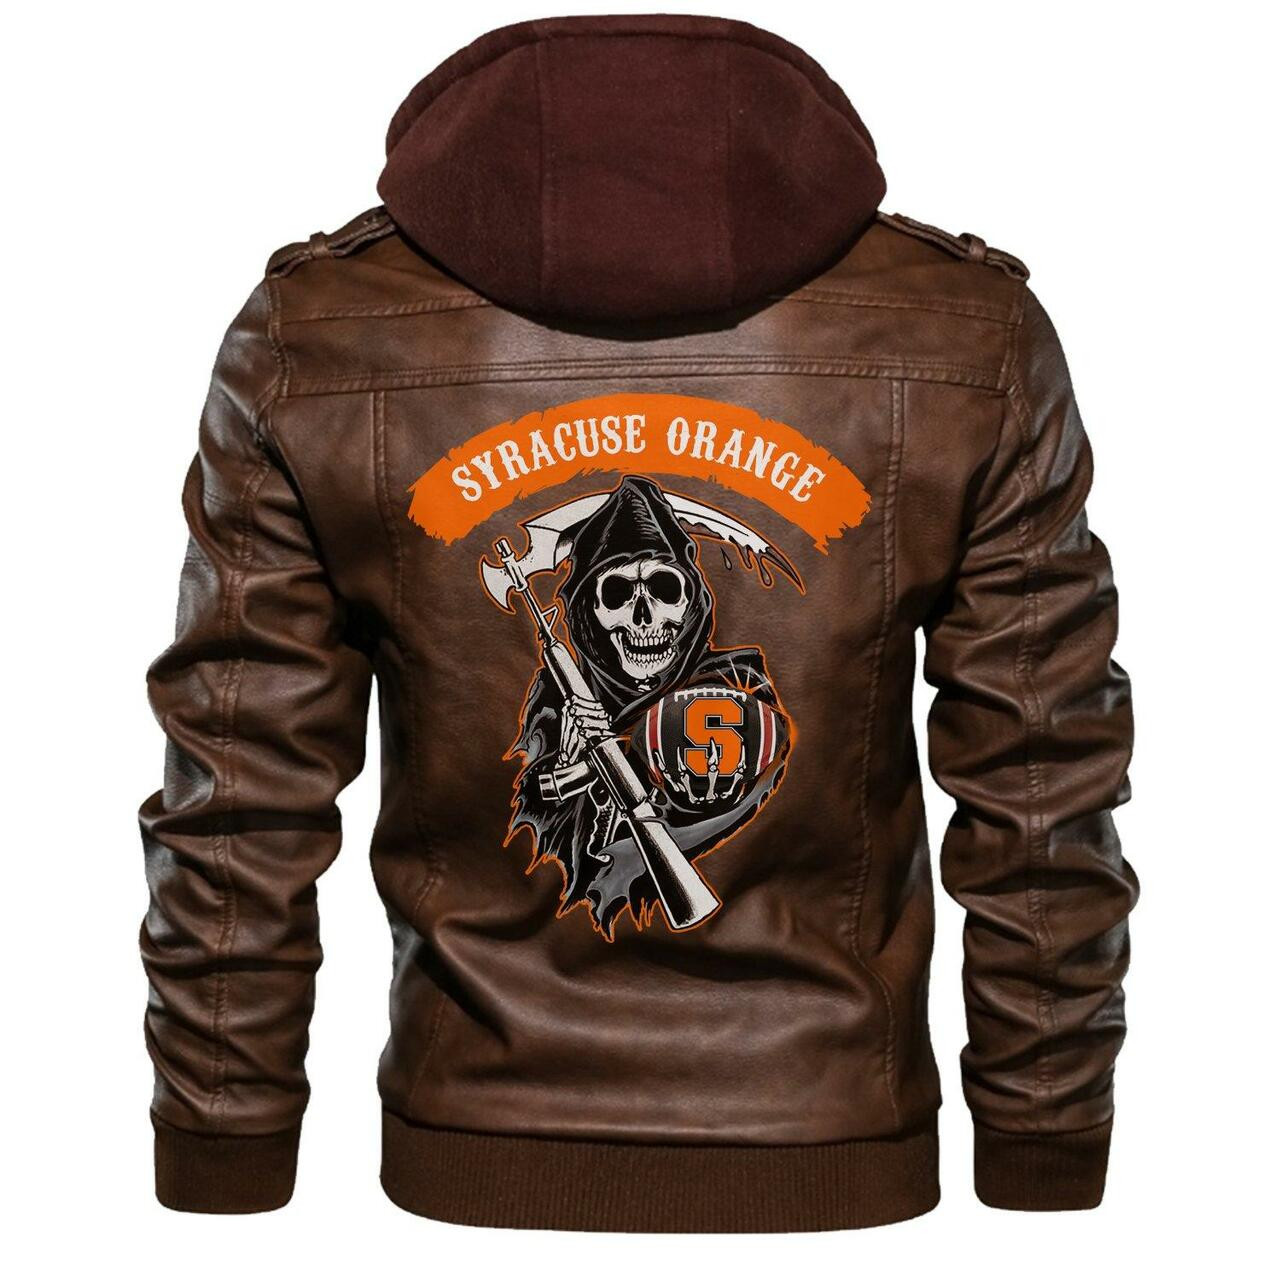 Check out and find the right leather jacket below 12